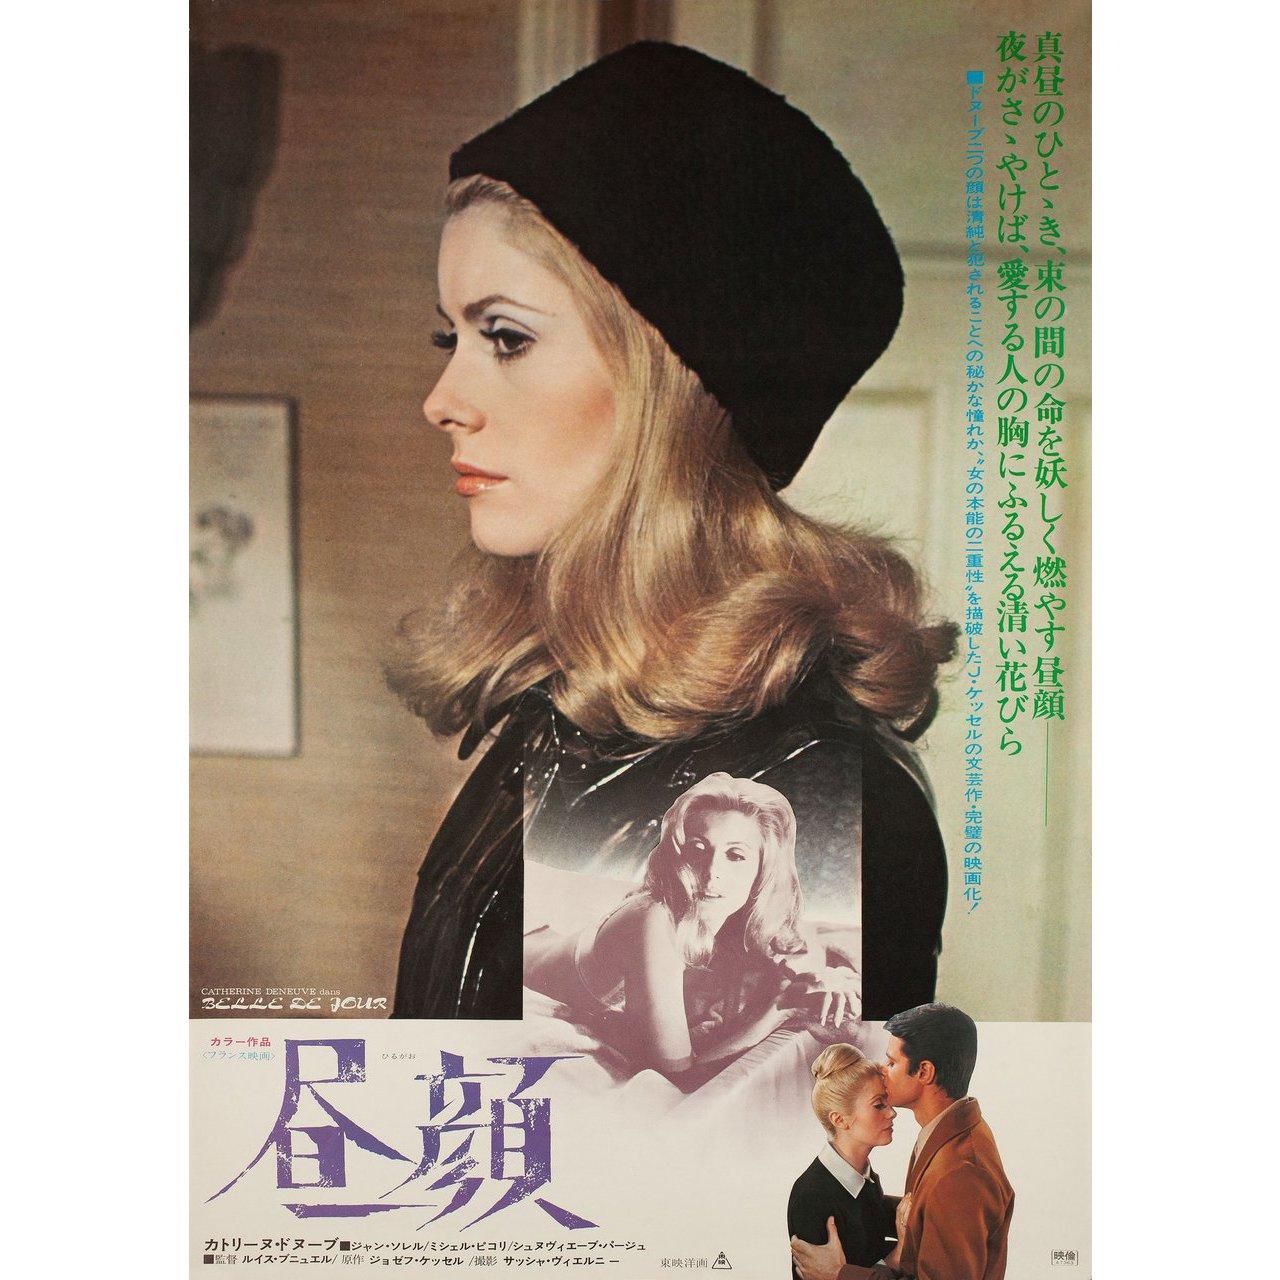 Original 1972 re-release Japanese B2 poster for the 1967 film Belle de Jour directed by Luis Bunuel with Catherine Deneuve / Jean Sorel / Michel Piccoli / Genevieve Page. Very Good-Fine condition, rolled. Please note: the size is stated in inches